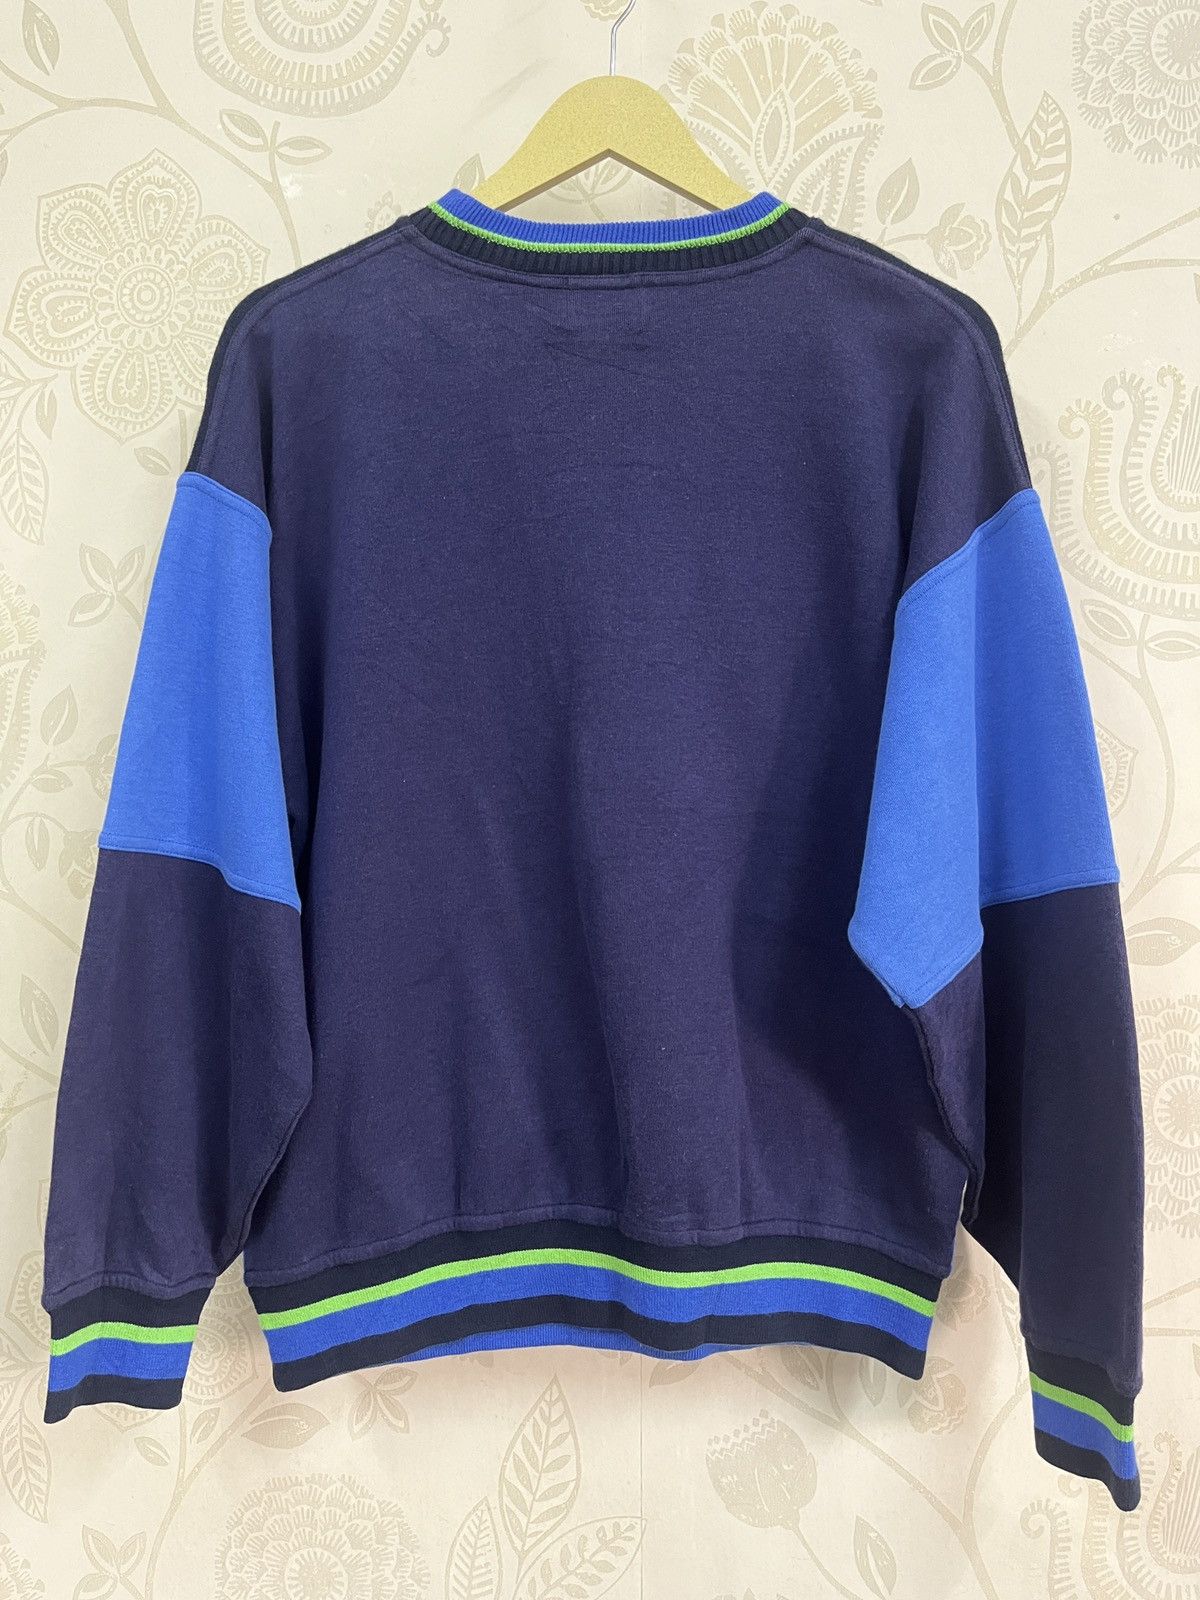 Vintage Modigliani Sweater Made In Italy - 2